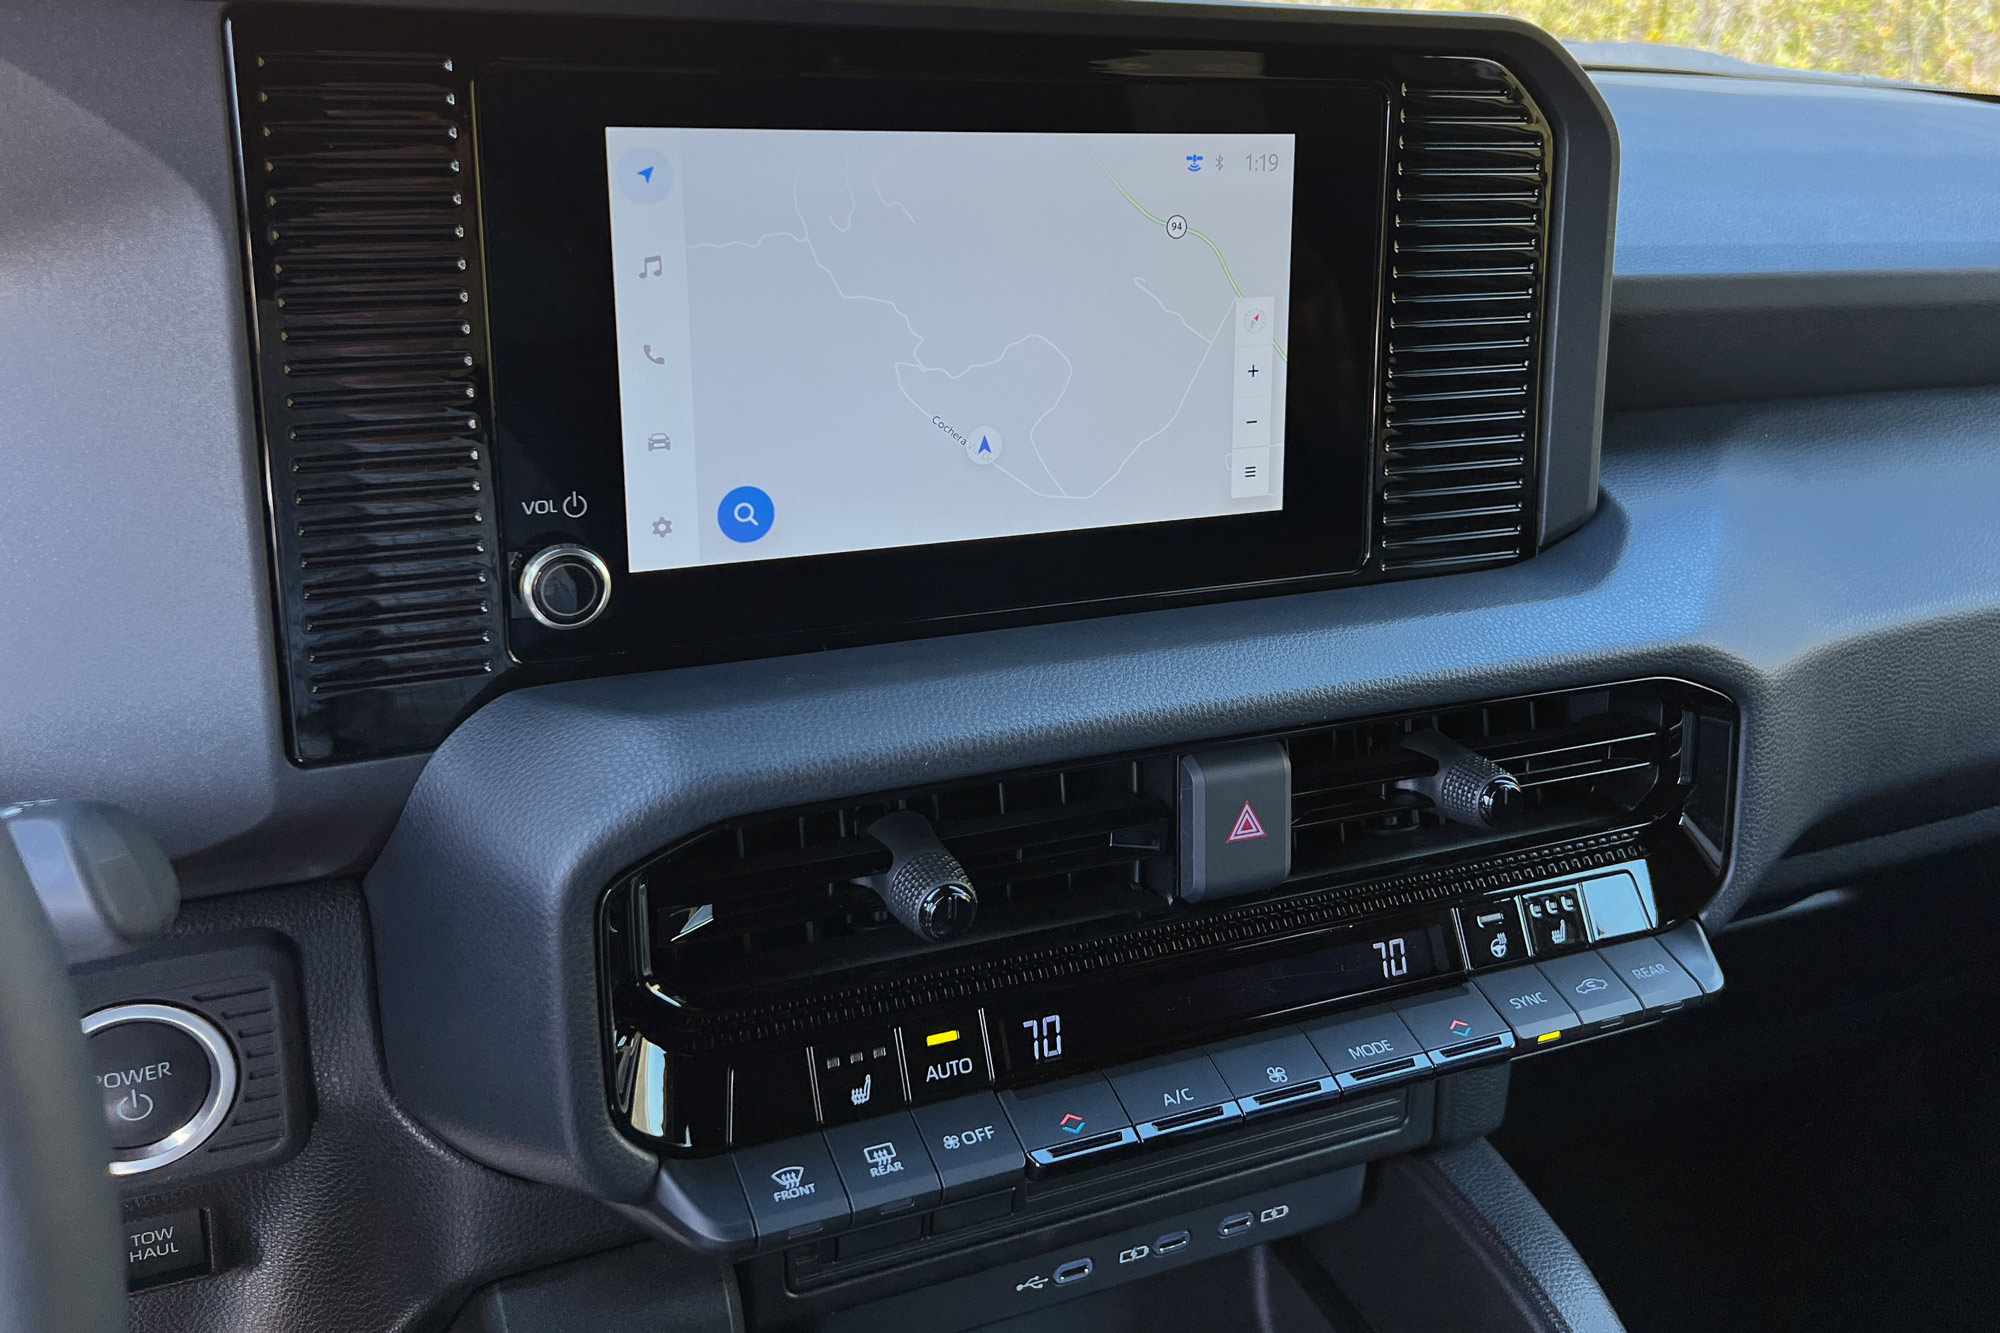 The 2024 Toyota Land Cruiser 1958 Edition's infotainment system